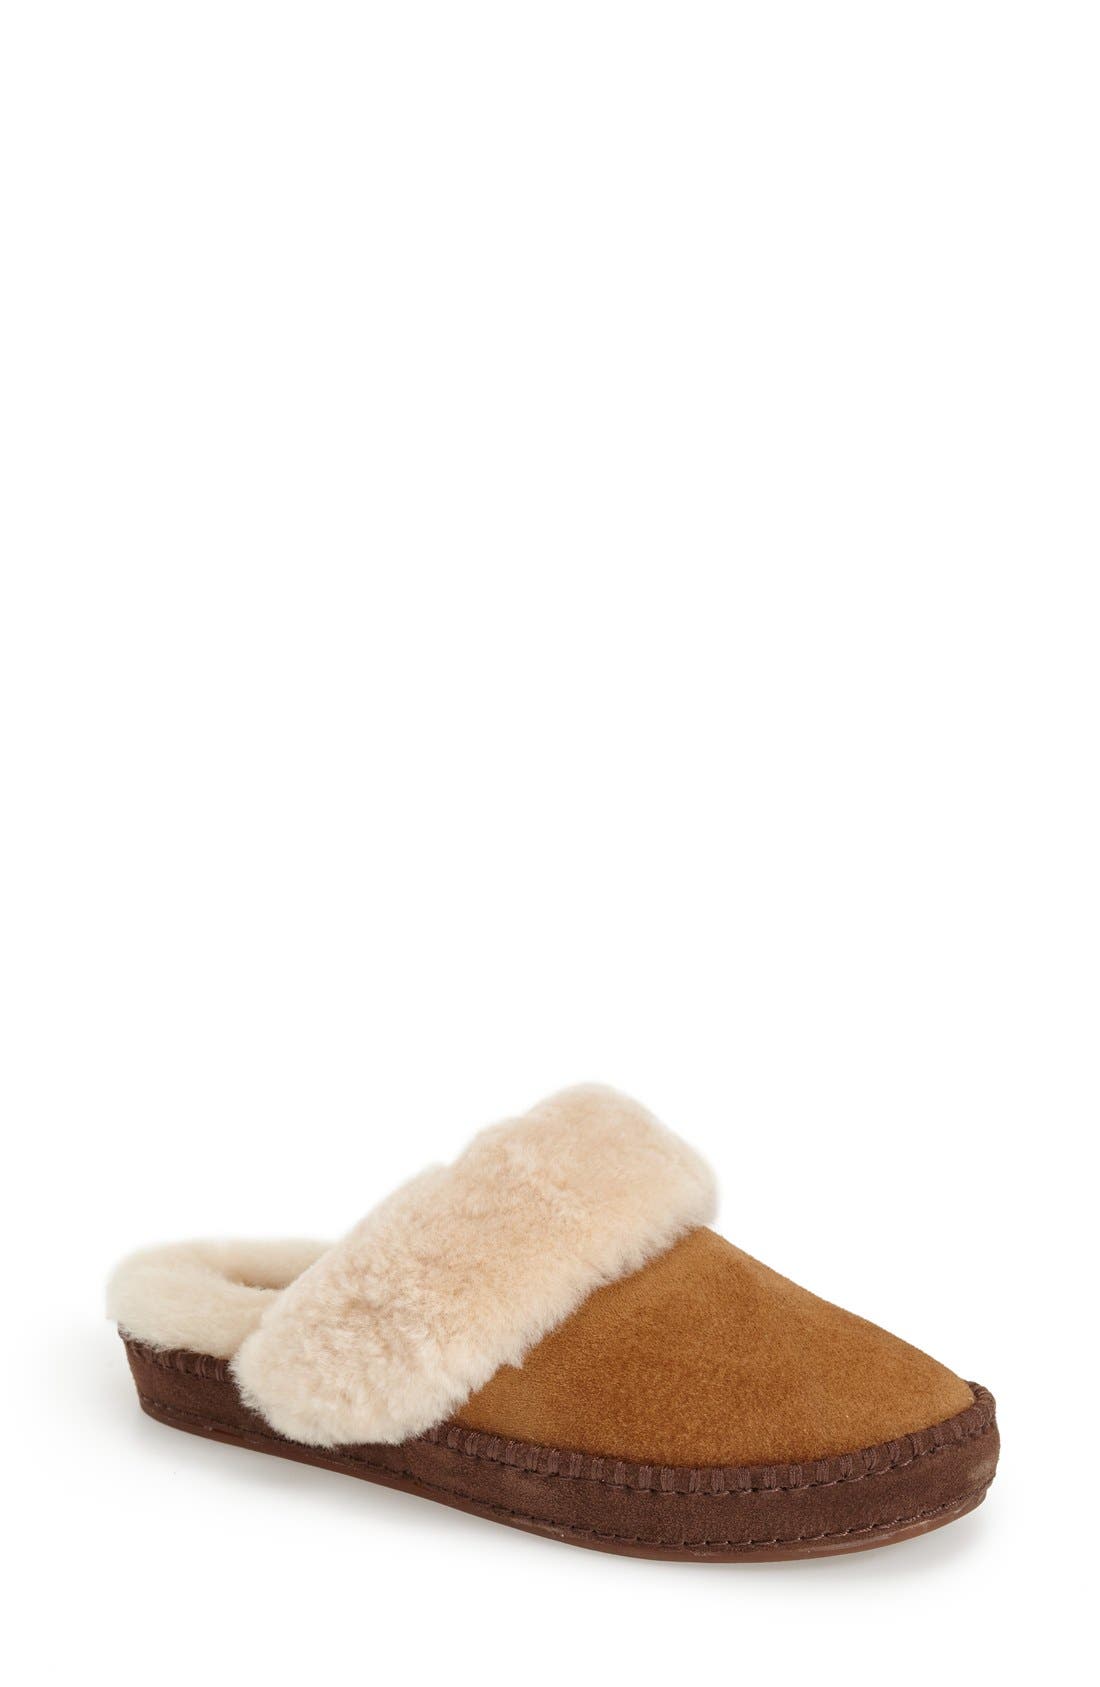 ugg aira slippers sale